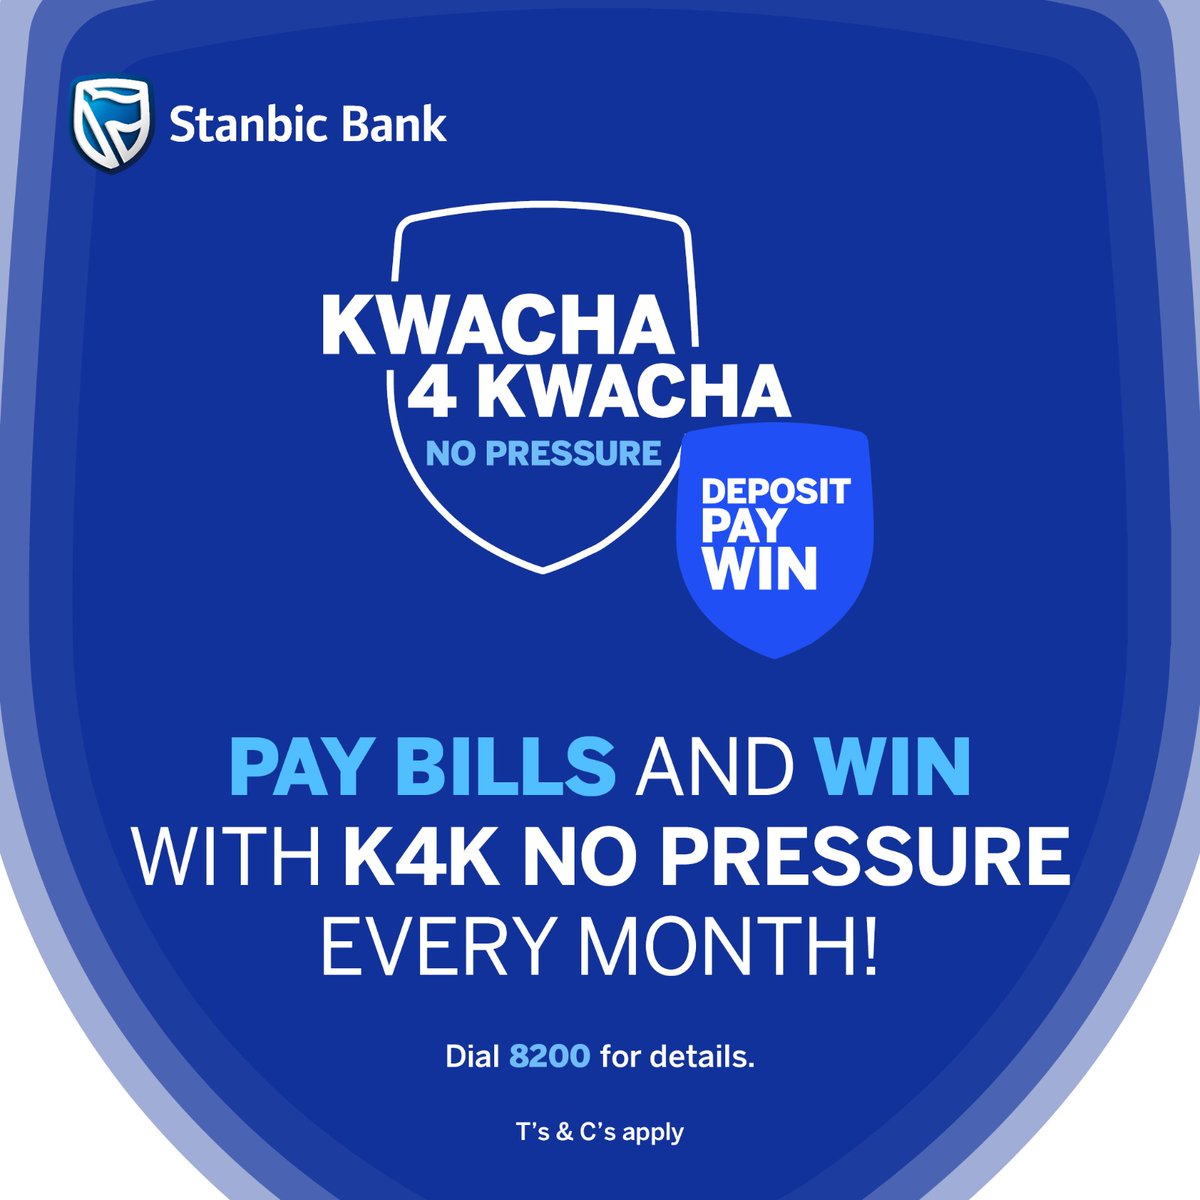 Pay for your utility bills today by dialing *247# and follow the prompts and you could win some cool Kwacha-for-Kwacha No Pressure monthly prizes. Promotion ends on 31st March, 2025. Ts and Cs apply. #WinWithStanbic #K4KNoPressure